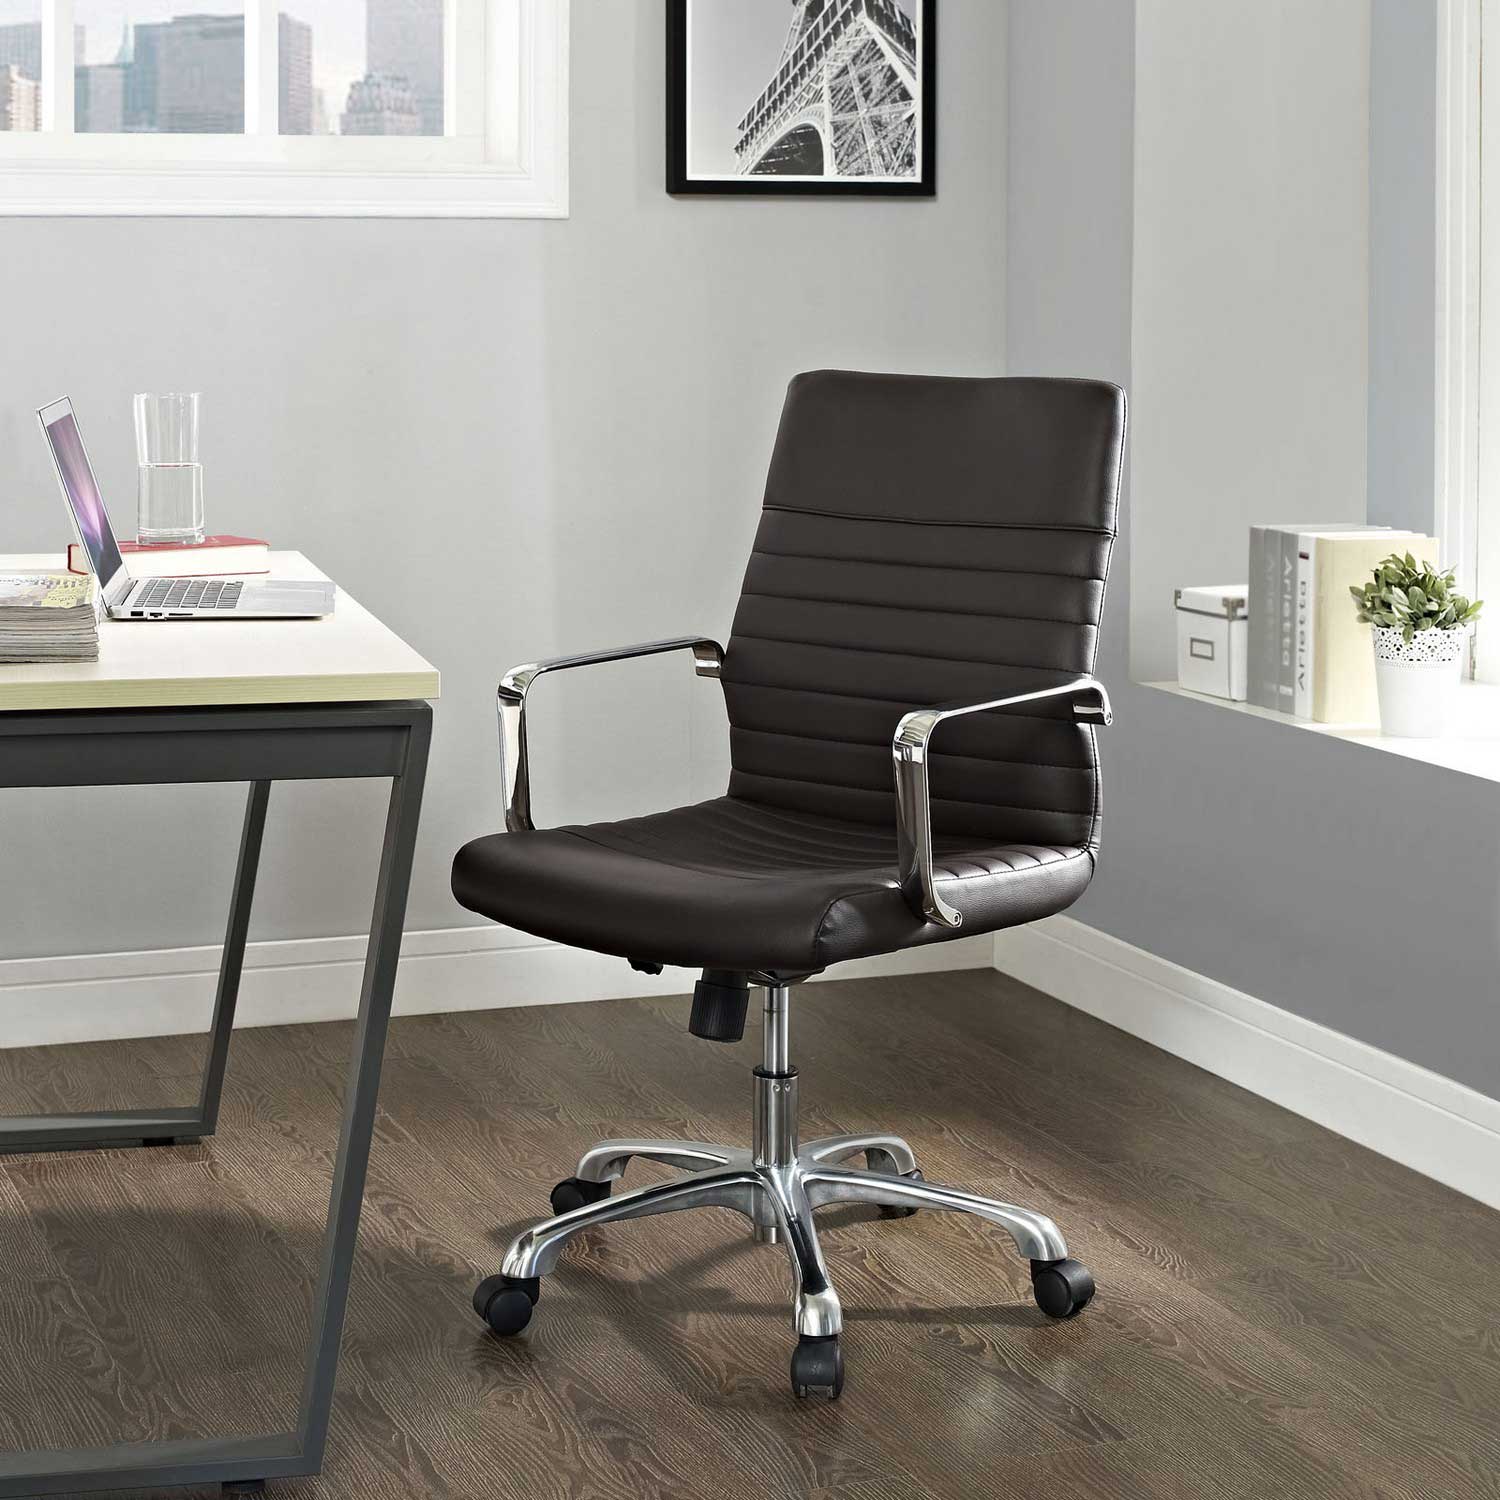 Modway Finesse Mid Back Office Chair - Brown